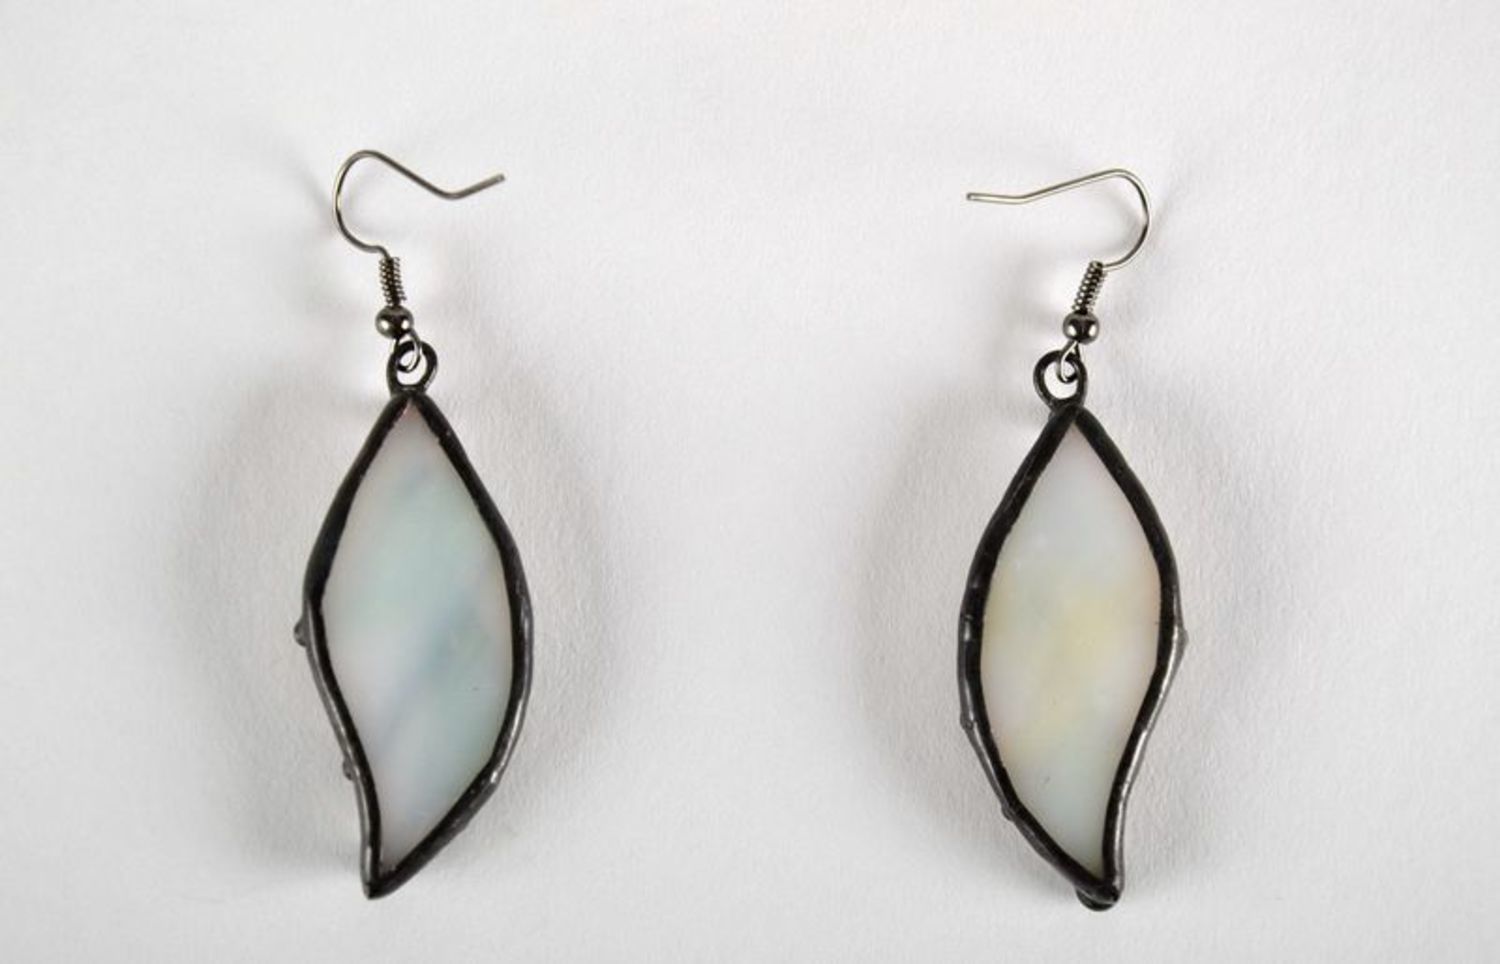 Stained glass earrings made from copper and glass photo 2